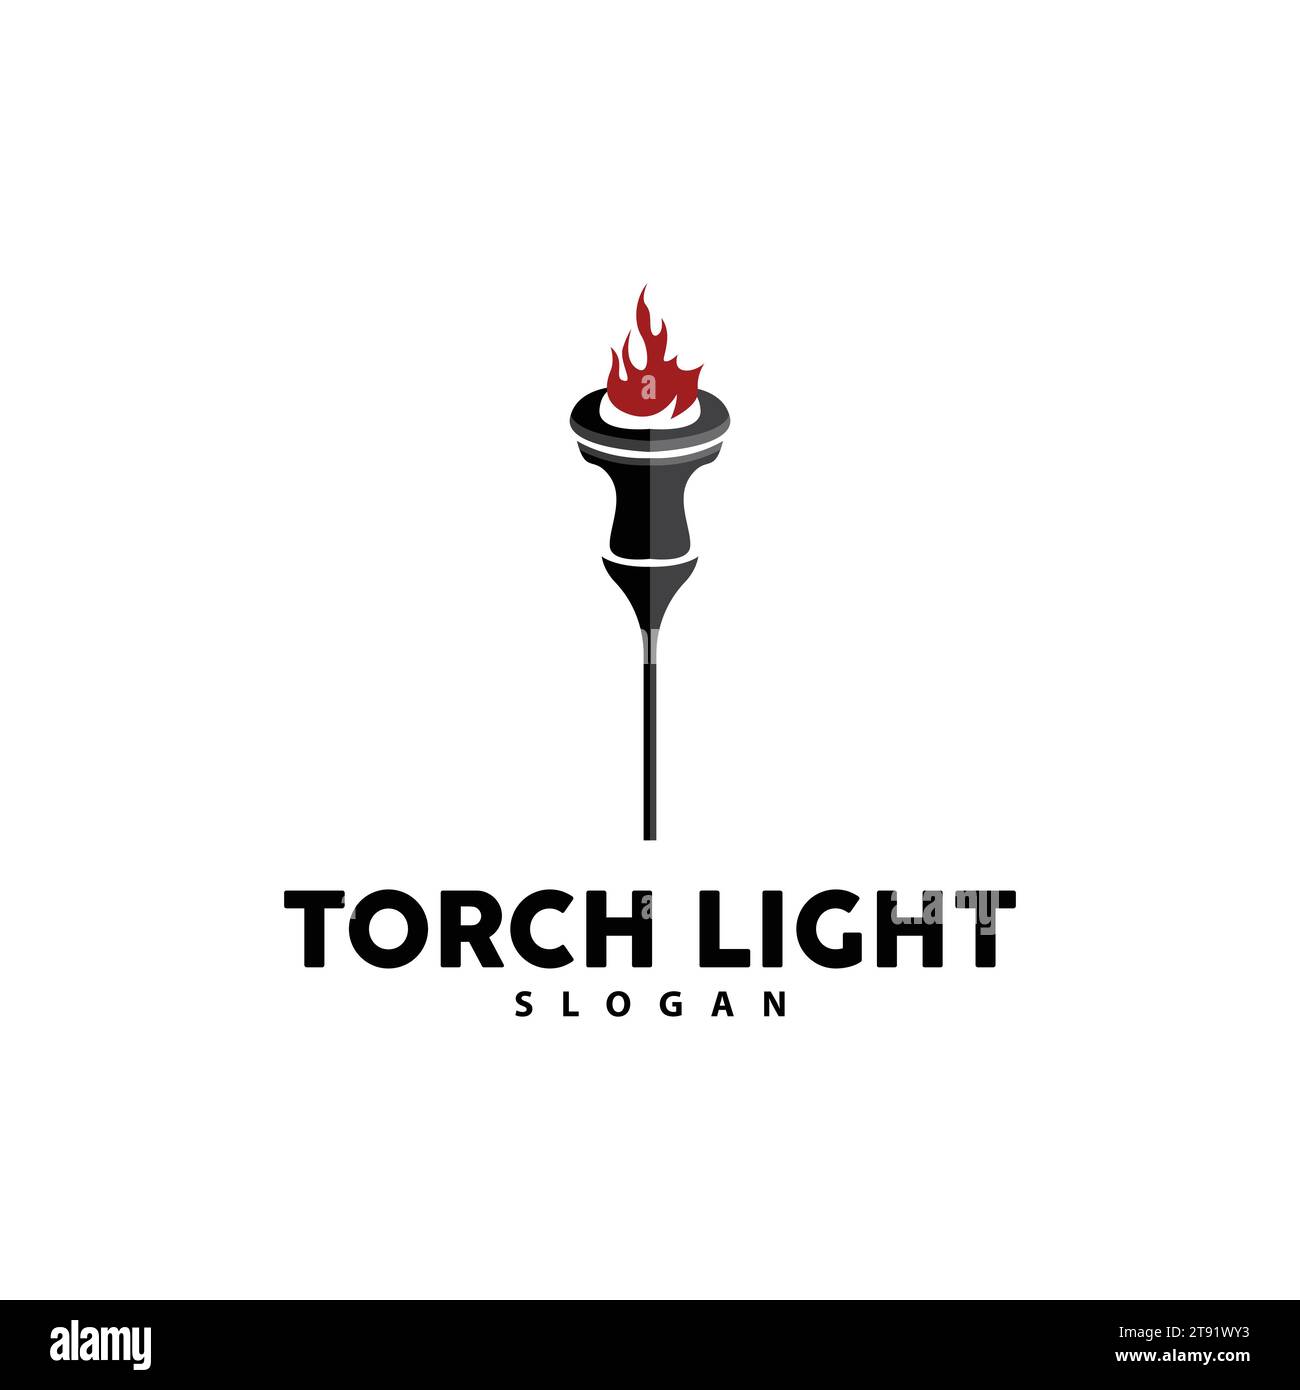 Torch Logo, Olympic Flame Vector, Simple Minimalist Design Template Illustration Stock Vector